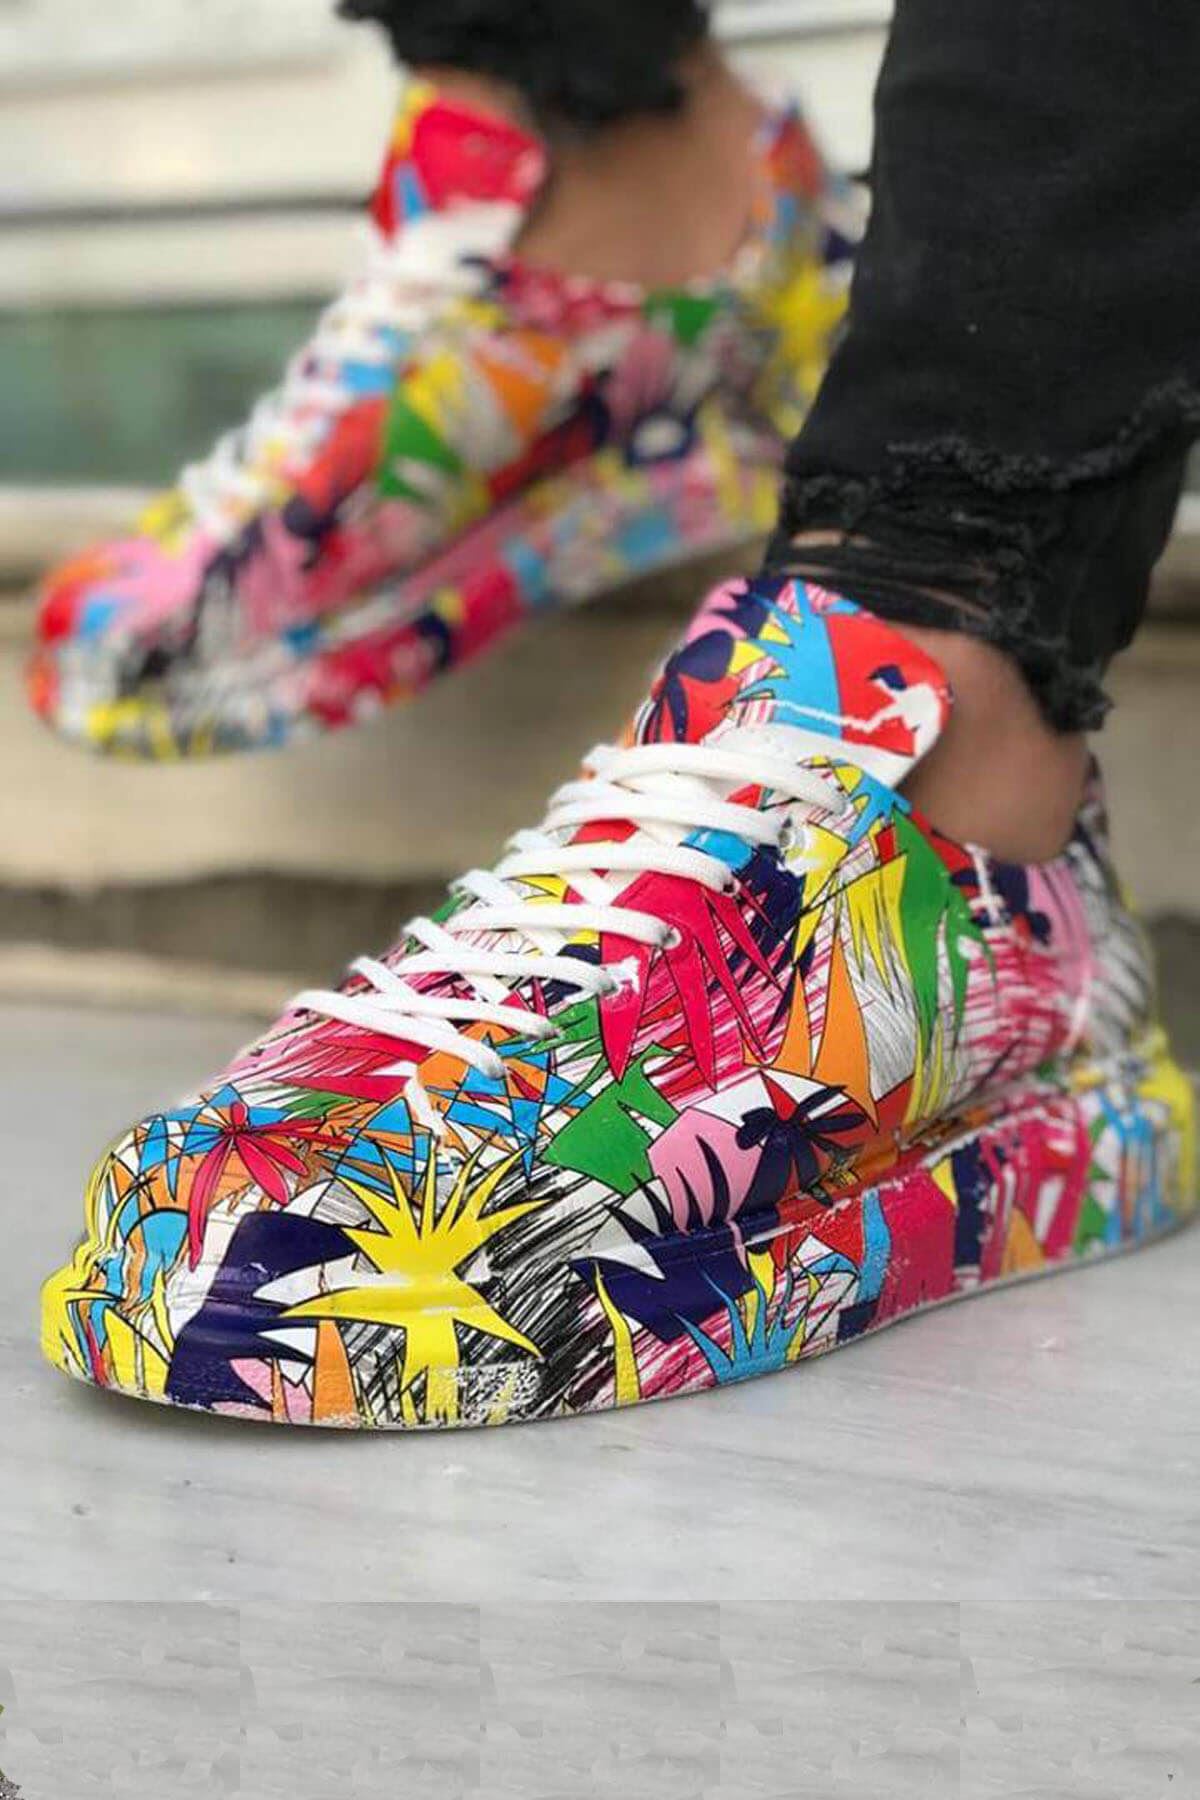 Chekich Men & Women Shoes Colorful Printed Faux Leather Unisex Sneakers Lace Up Summer Pattern Orthopedic Skate Board Style Couples Lovers Sport Comfortable Lightweight Casual Fashion Odorless Breathable Adult CH255 V1